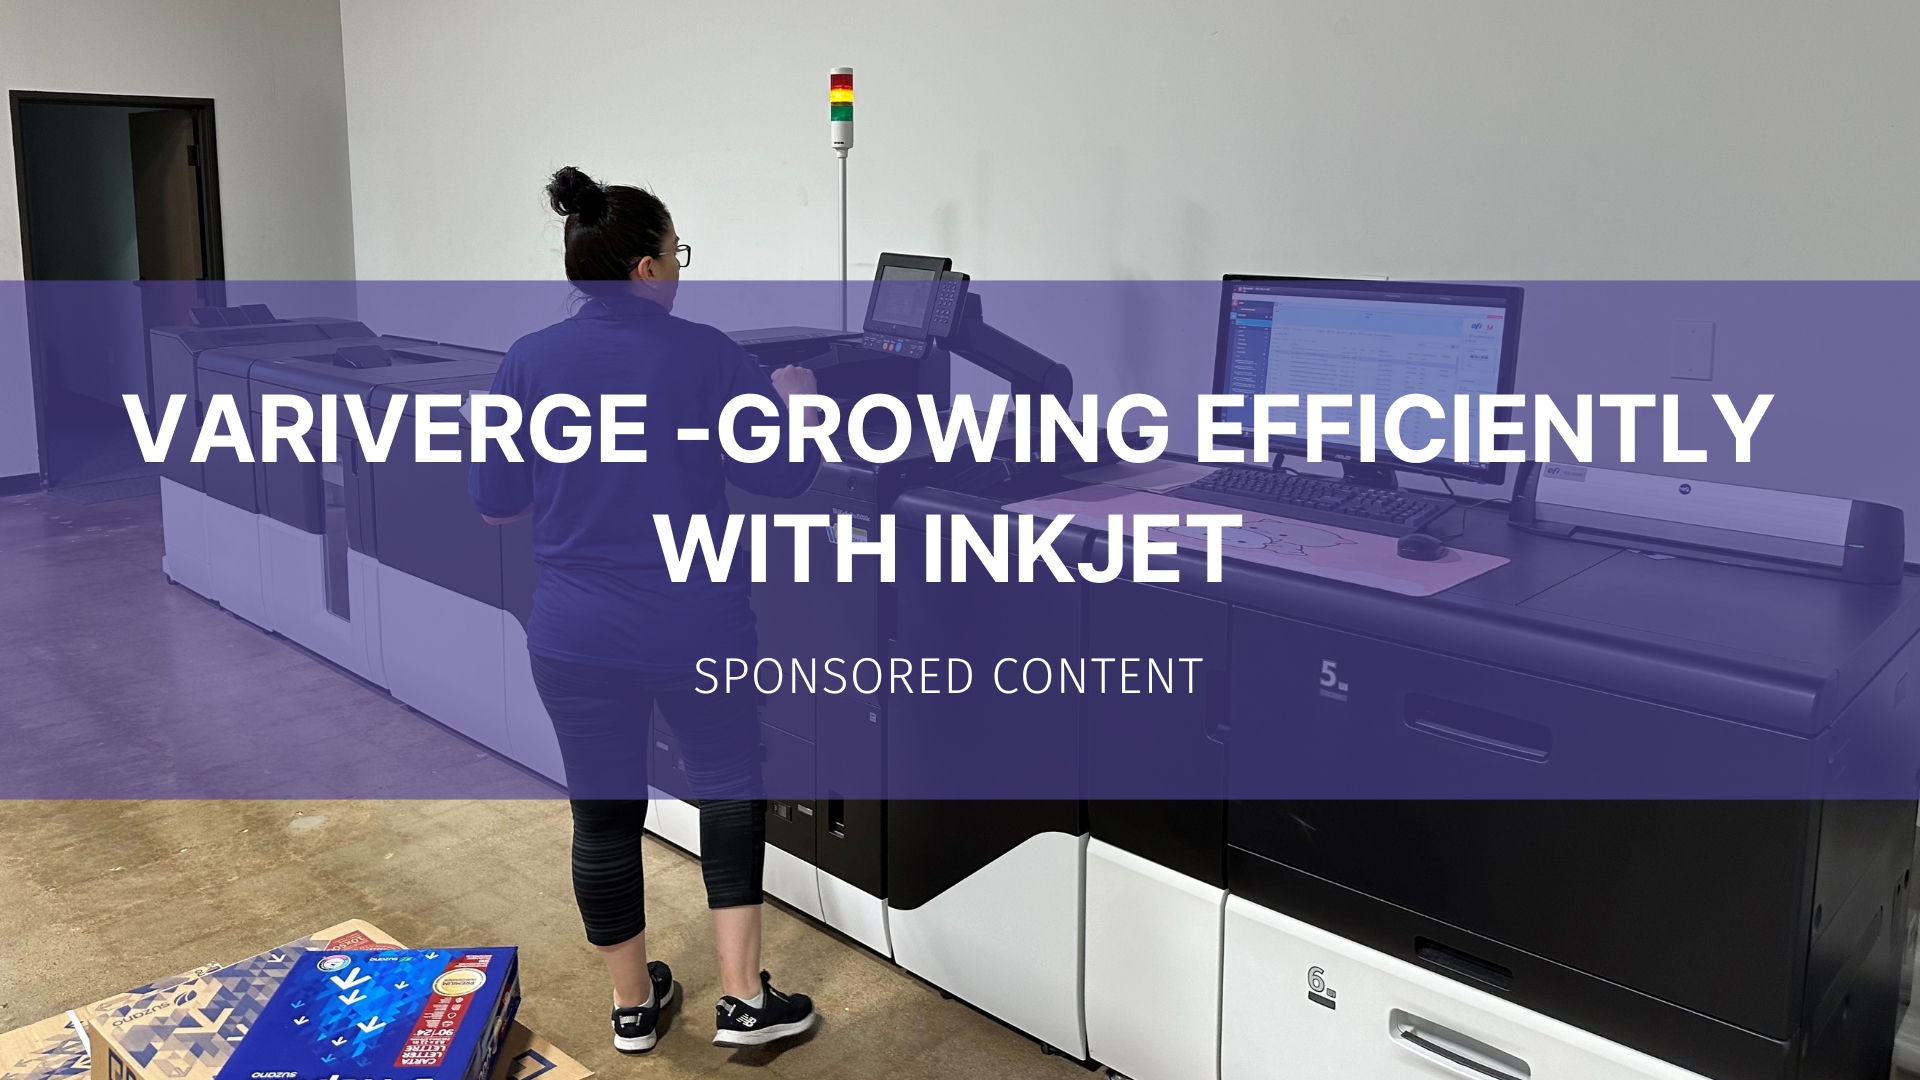 Featured image for “VariVerge -Growing efficiently with inkjet”